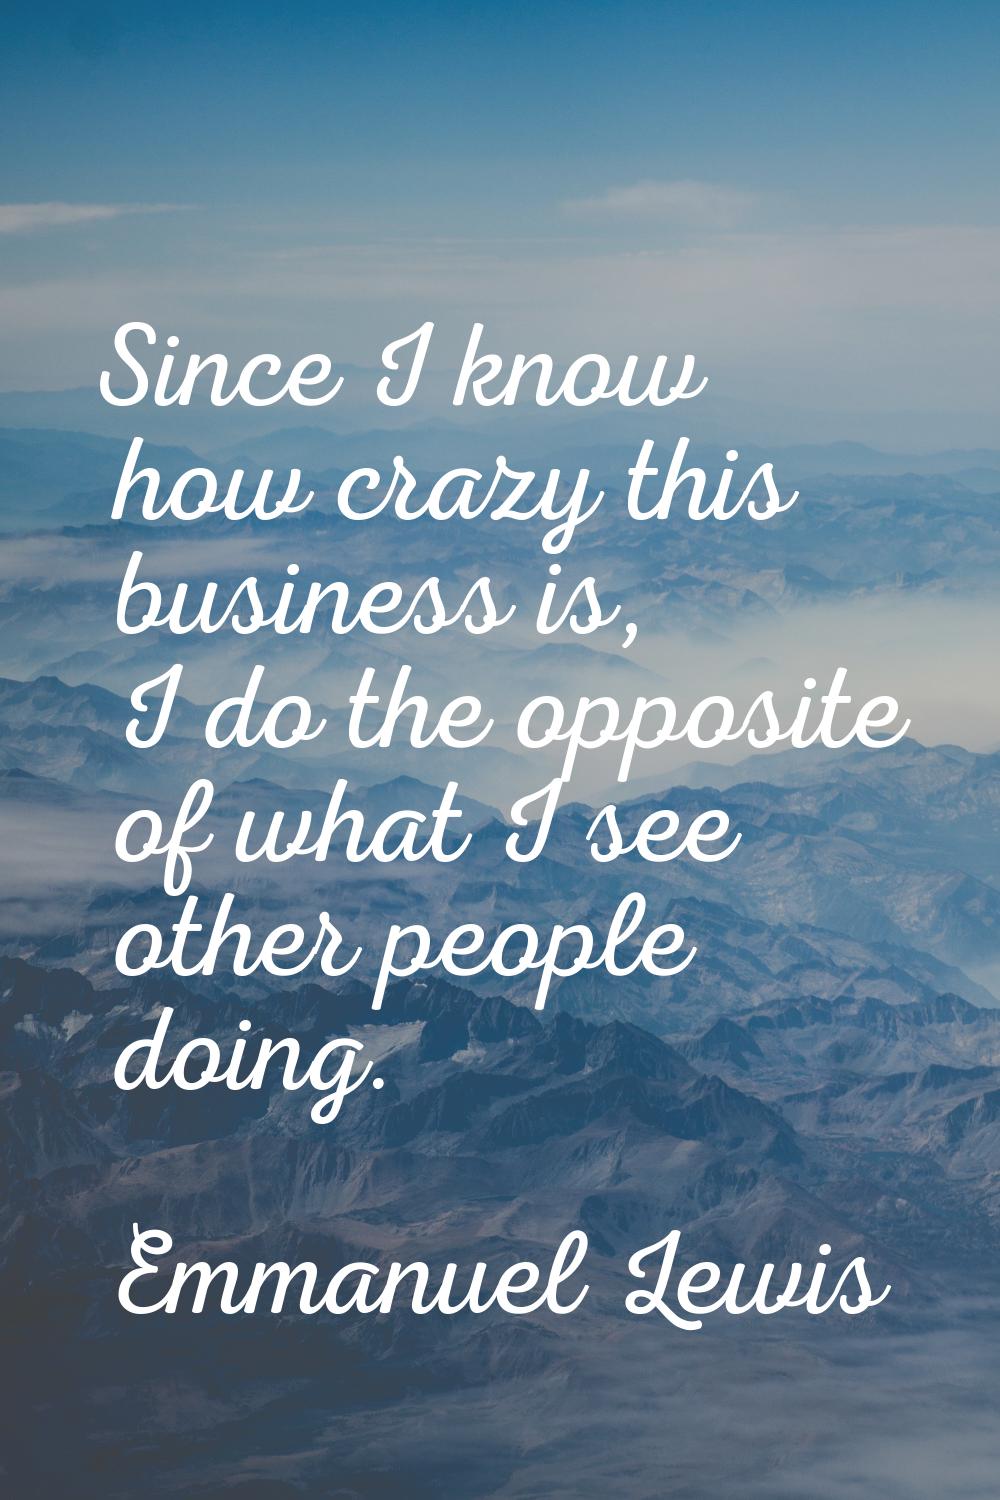 Since I know how crazy this business is, I do the opposite of what I see other people doing.